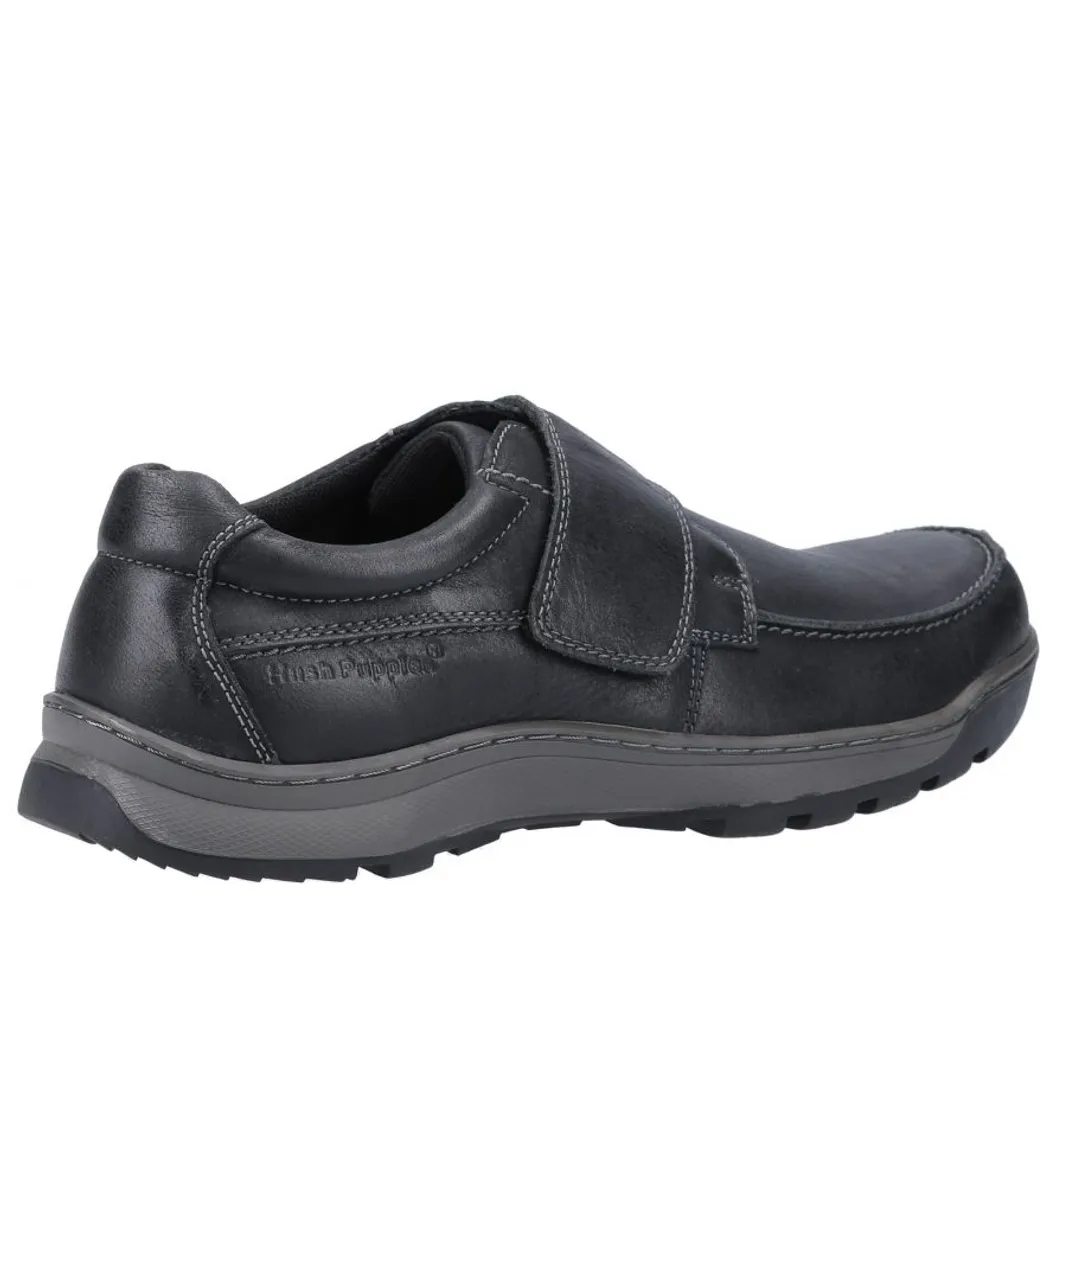 Hush Puppies Casper Touch Fastening Mens Shoes - Black Leather